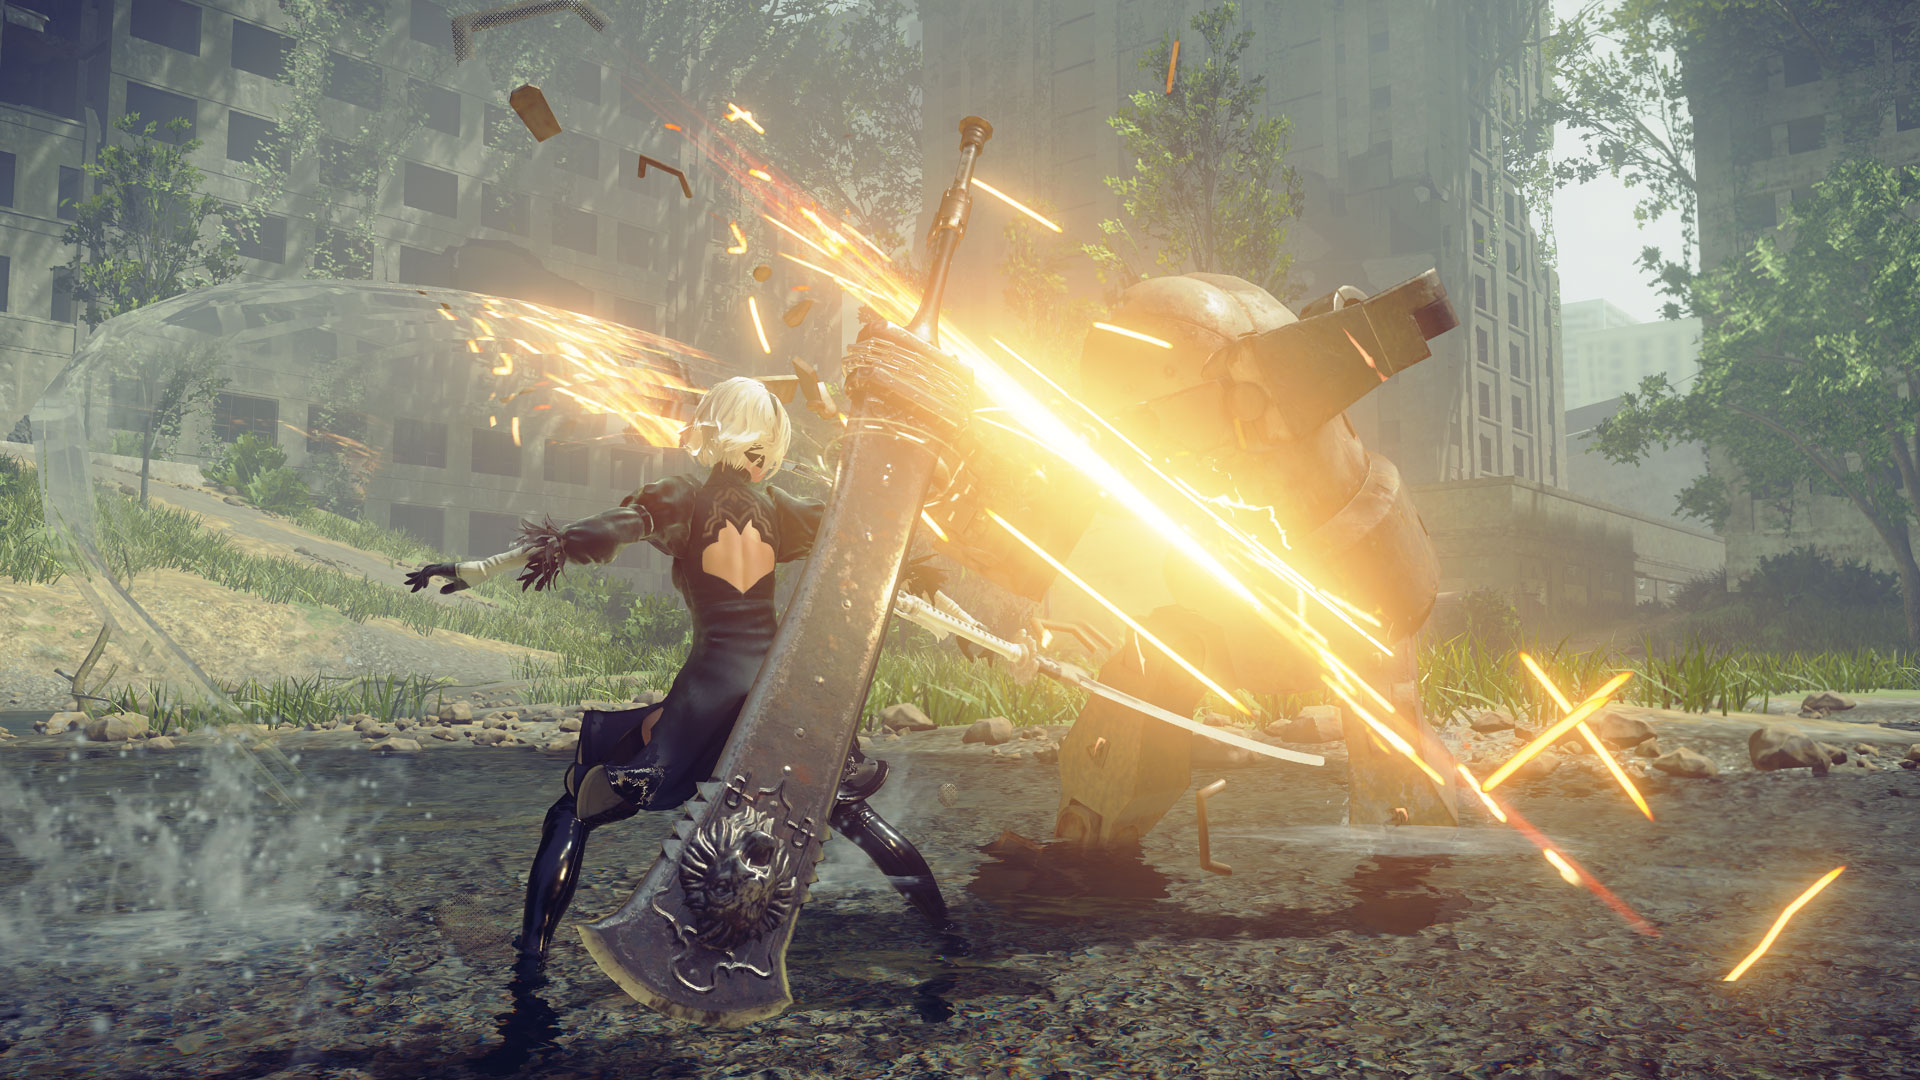 Nier: Automata, Nier, game of the yohra, year, edition, ps4, steam, new, trailer, features